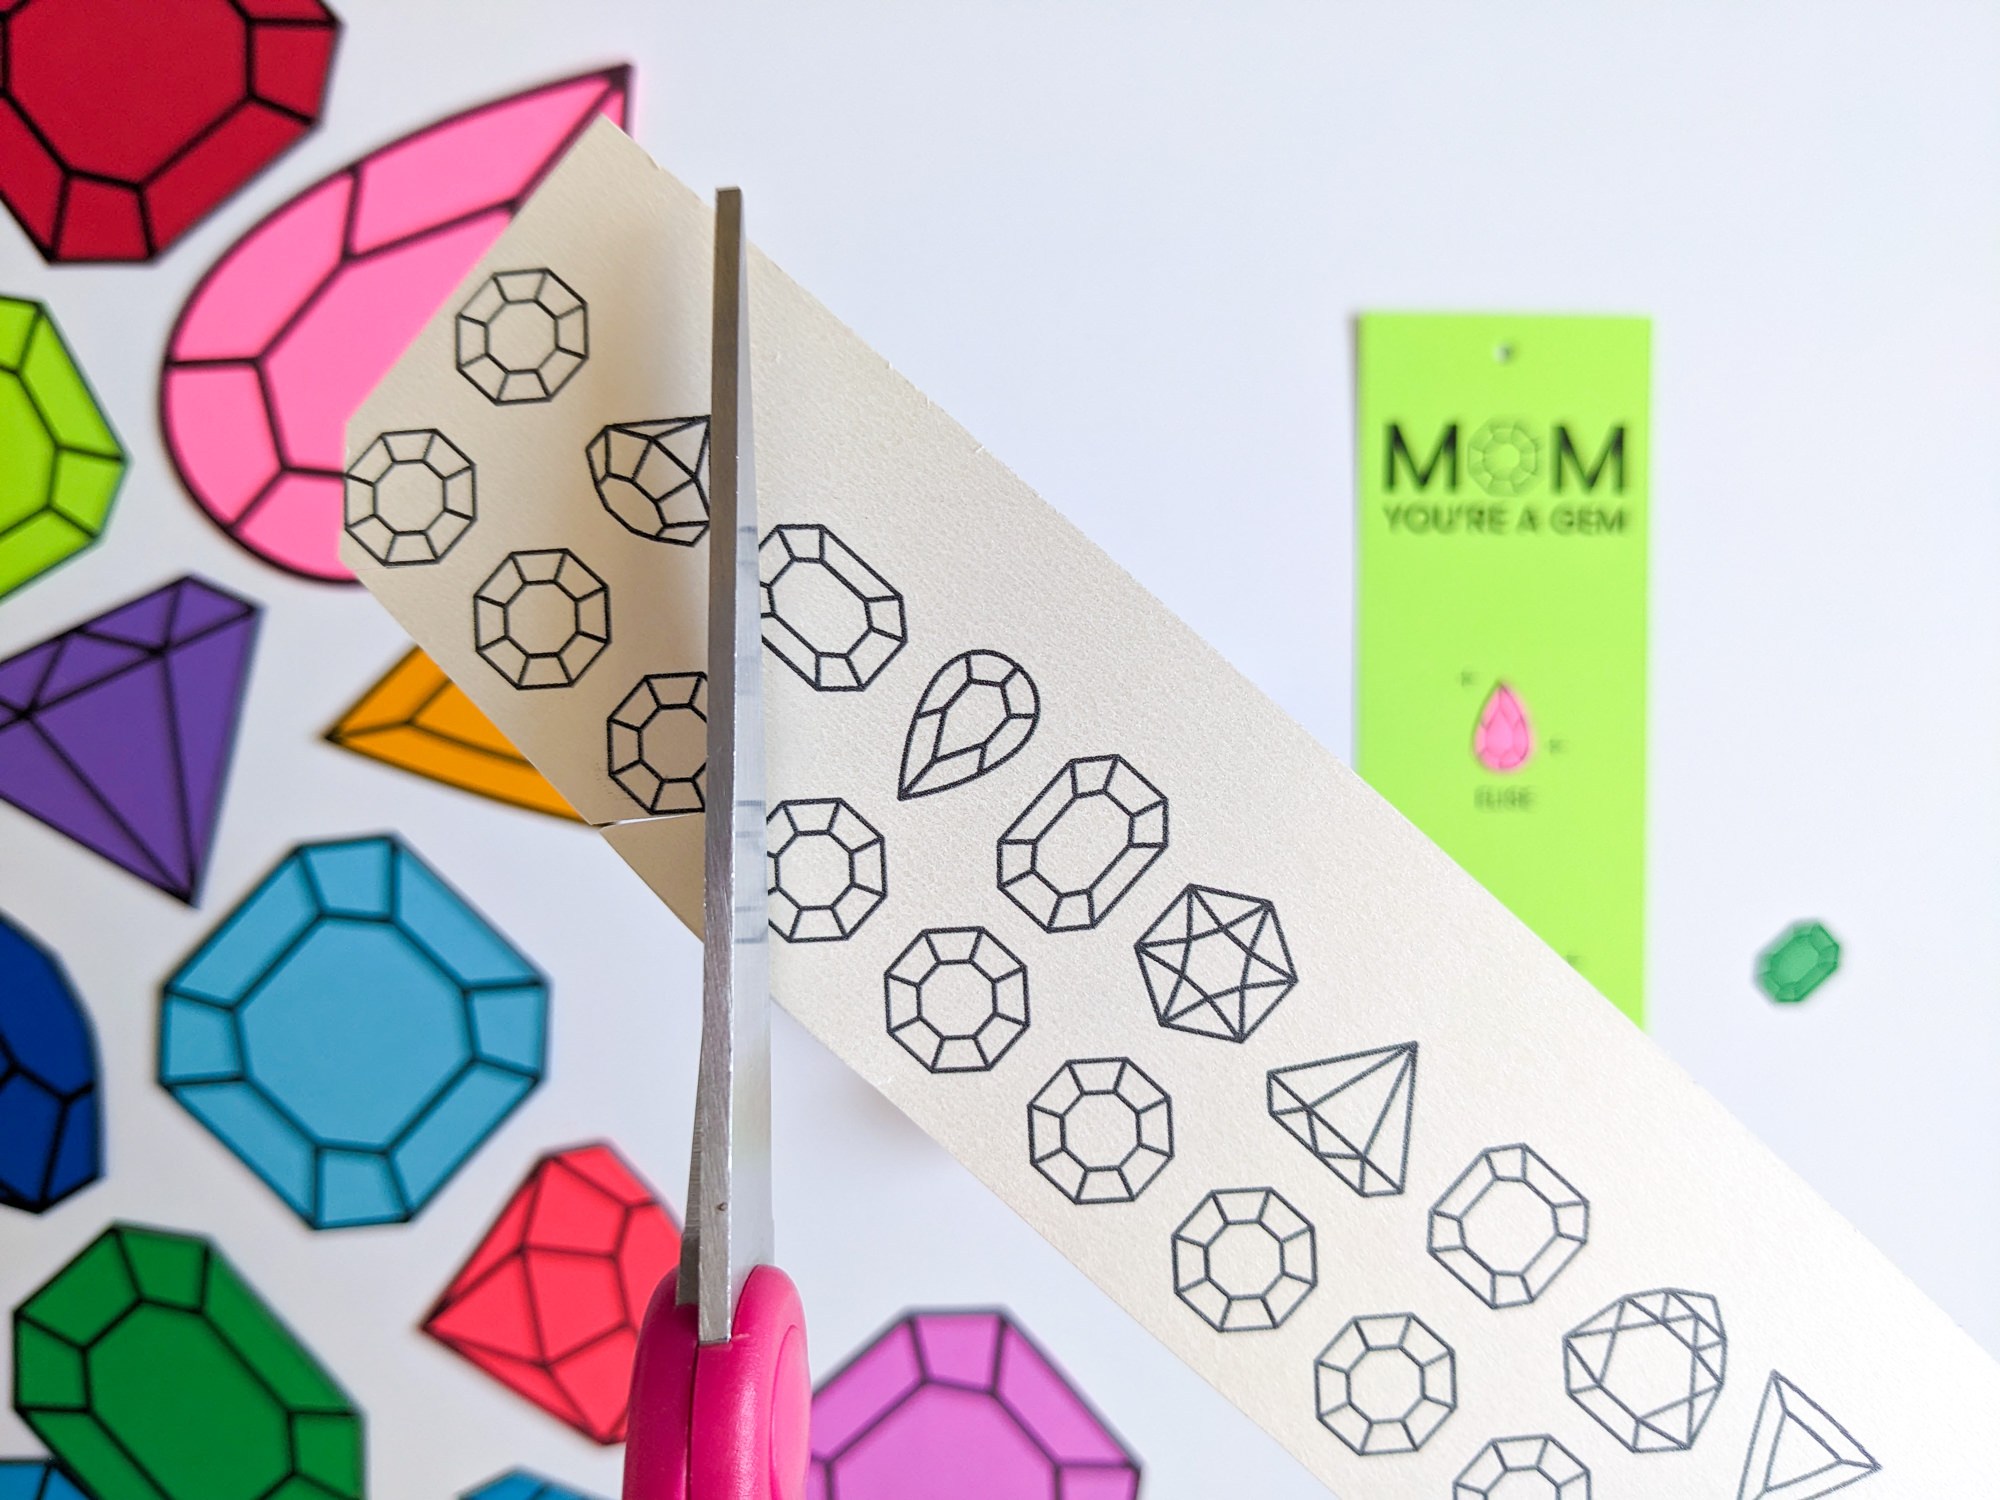 Cutting out paper gems with scissors to make DIY birthstone gifts for mom and grandma